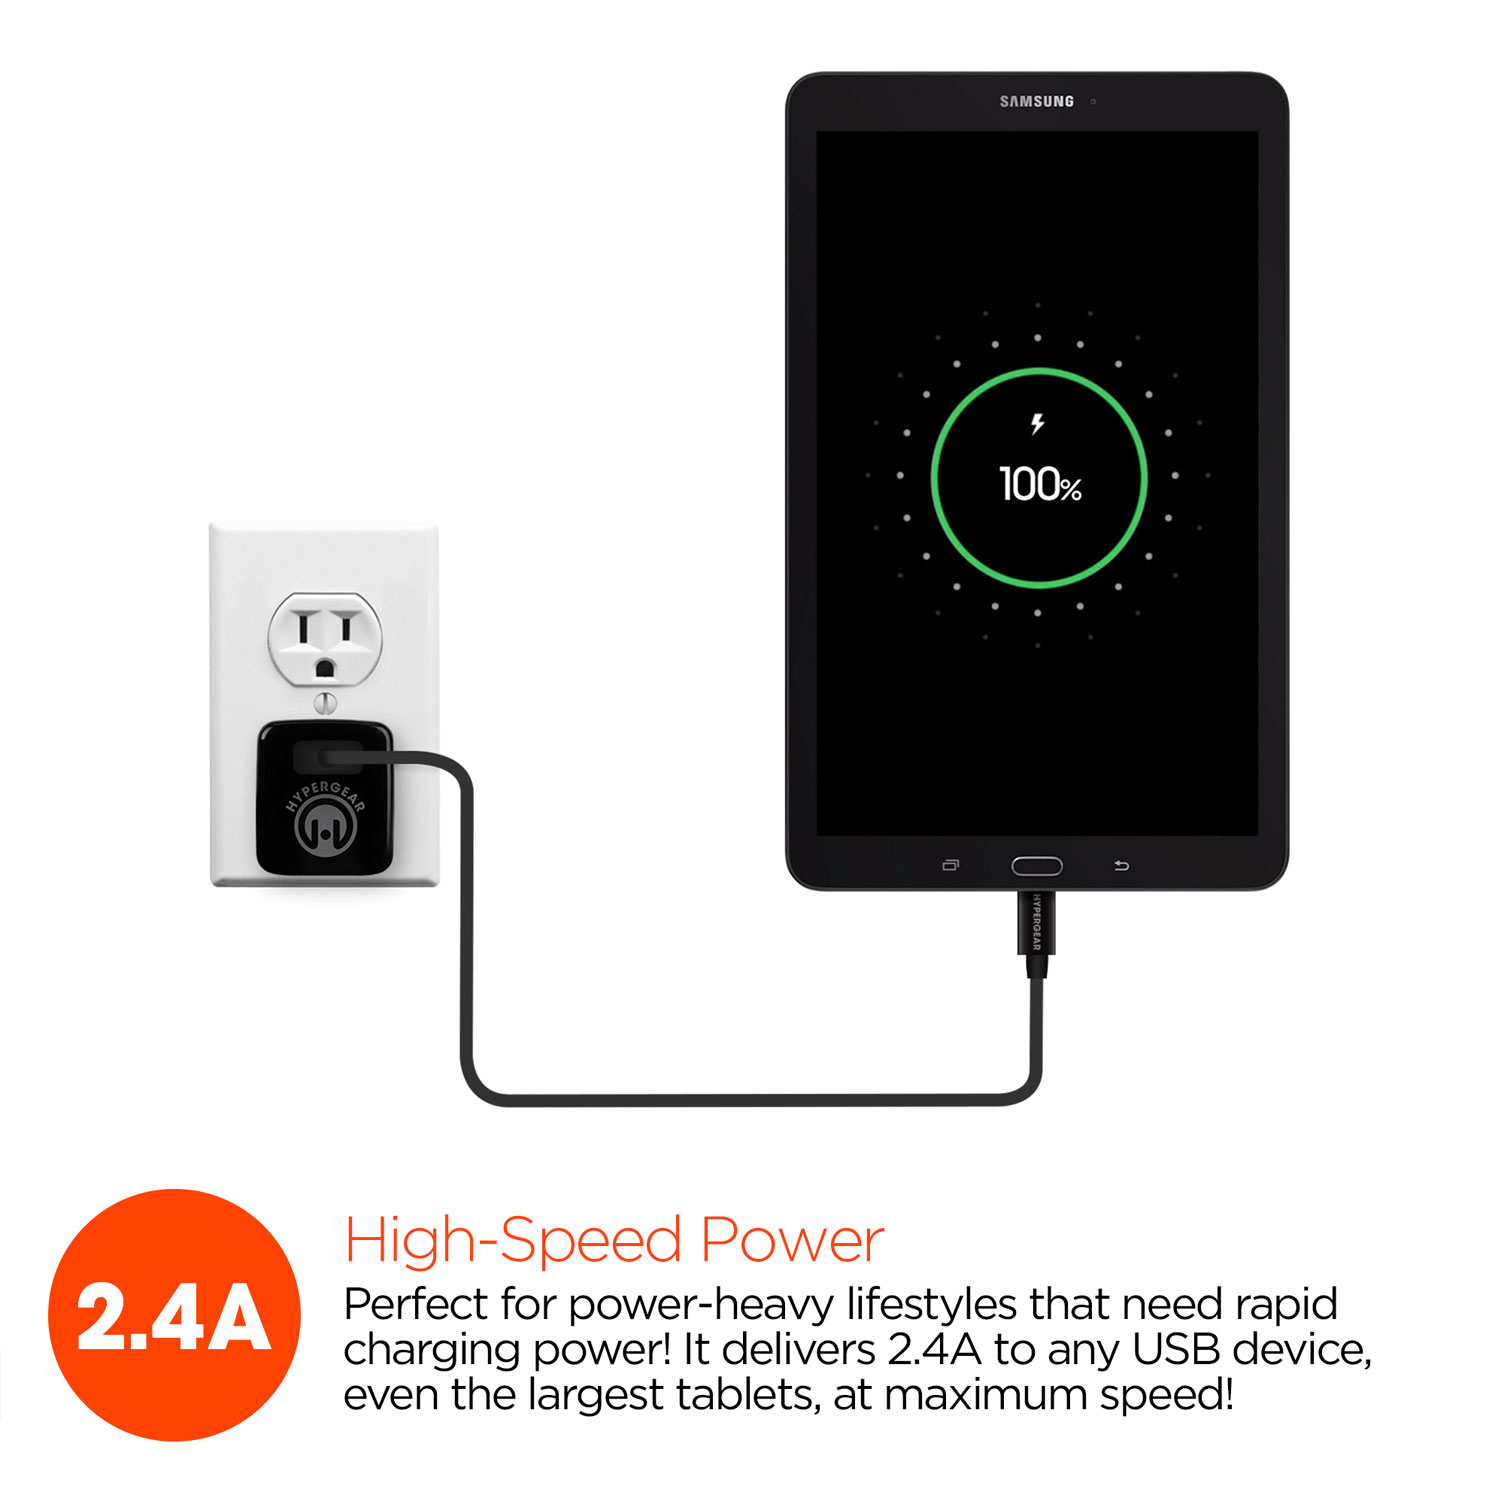 Rapid Wall Charger 2.4A